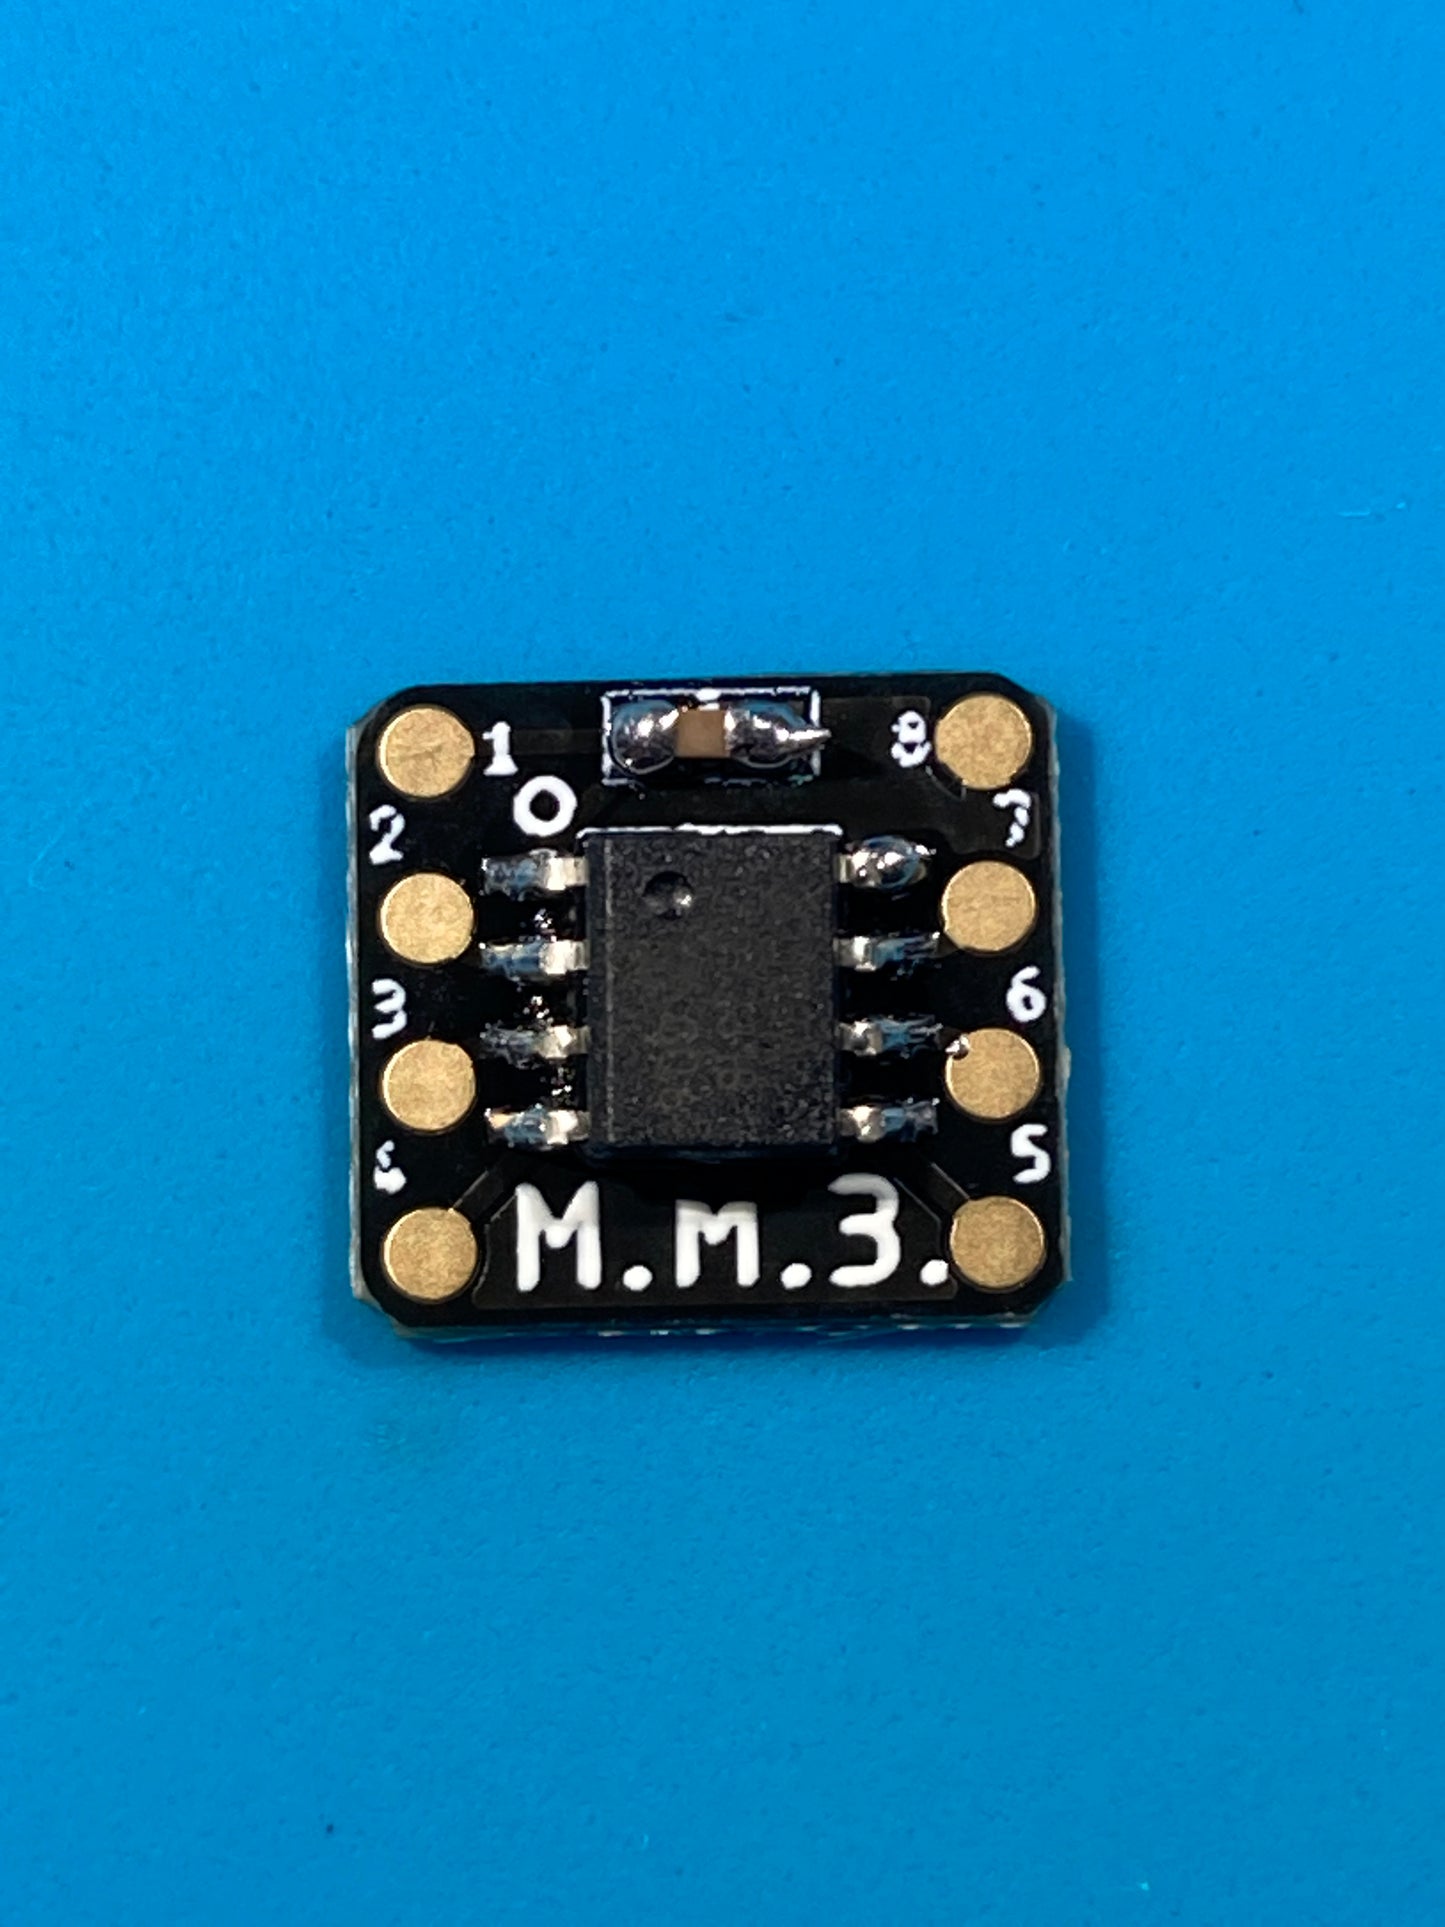 Ps1 - MM3 with Breakout PCB